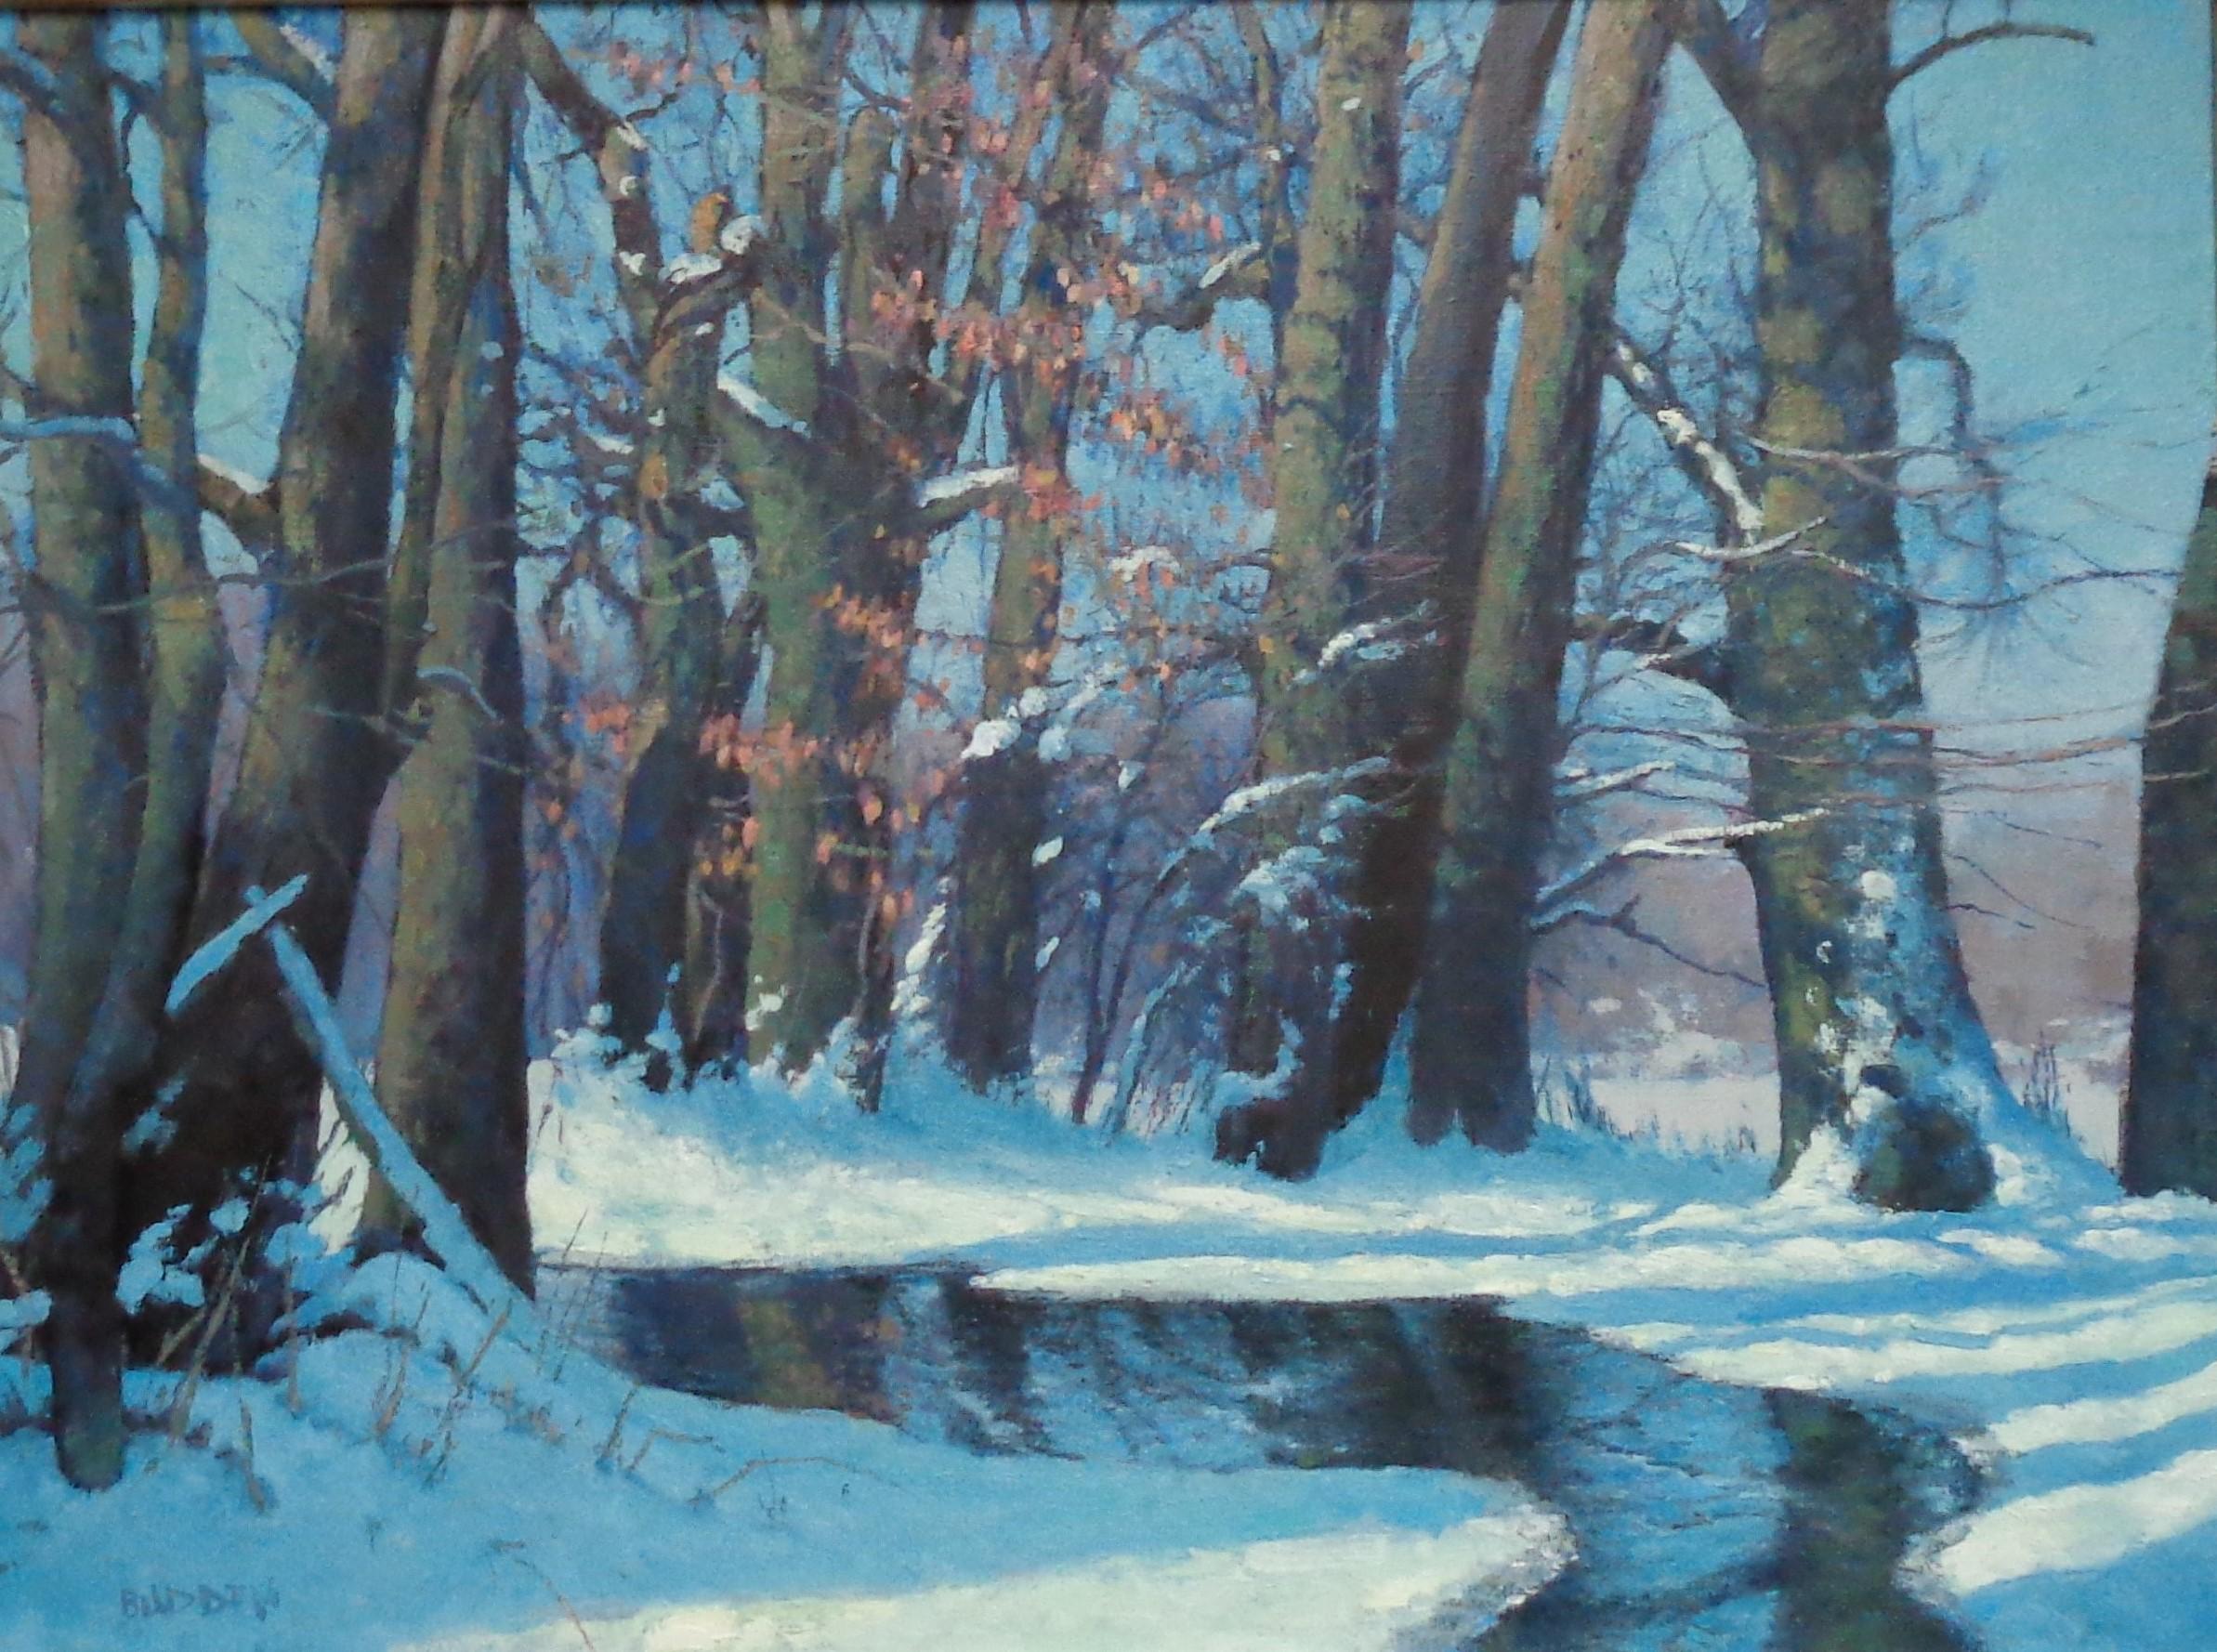  Winter Snow Scene Contemporary Landscape Oil Painting by Michael Budden For Sale 1